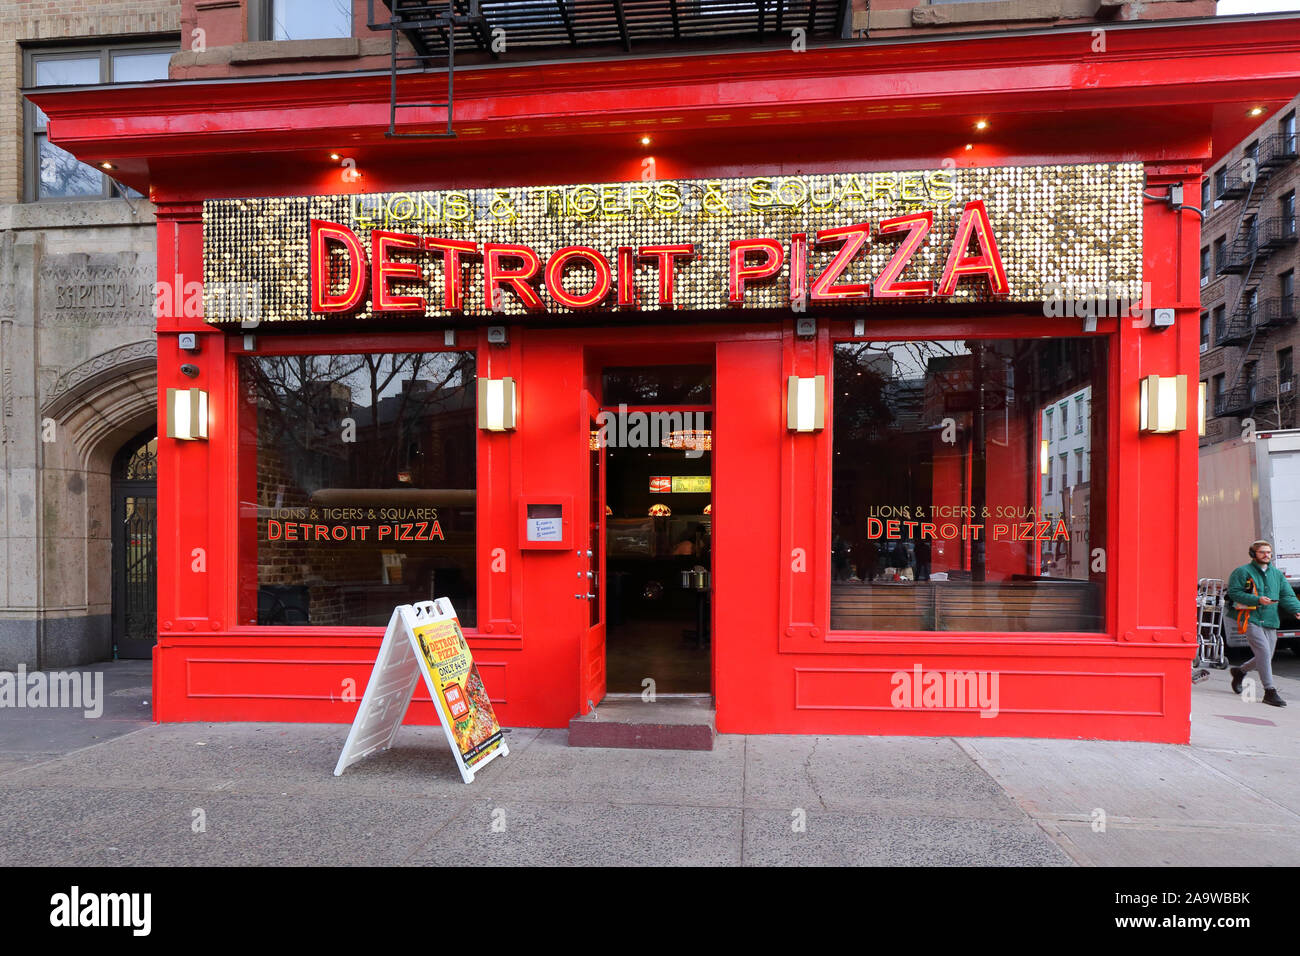 [historical storefront] Lions & Tigers & Squares Detroit Pizza, 160 2nd Ave, New York, NYC storefront photo of a Detroit pizzeria in the East Village Stock Photo